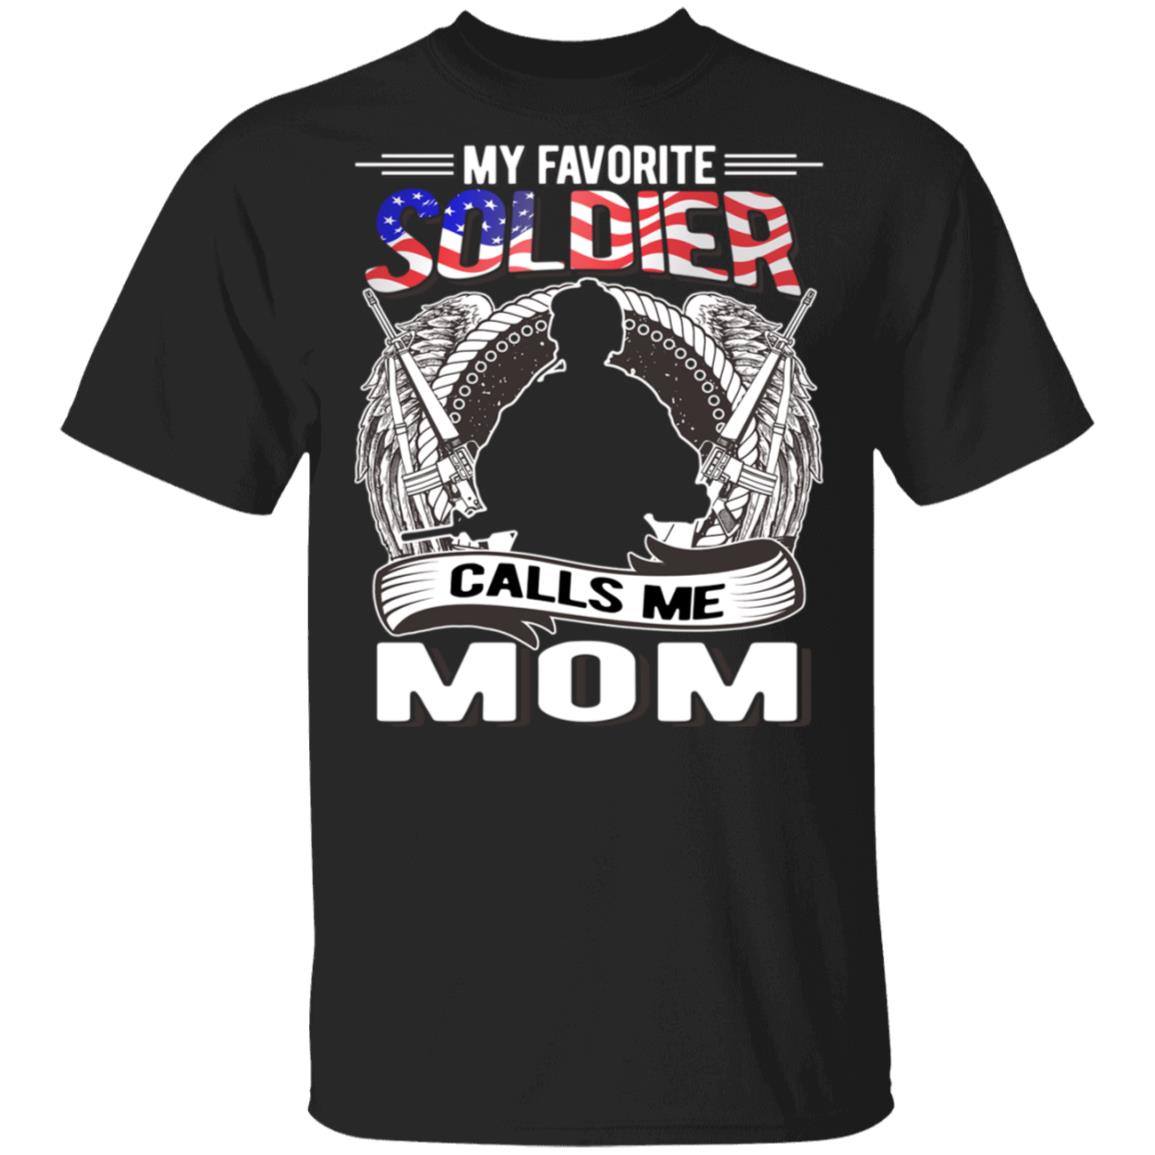 My Favorite Soldier Calls Me Mom Tshirt Mother's Day Gift